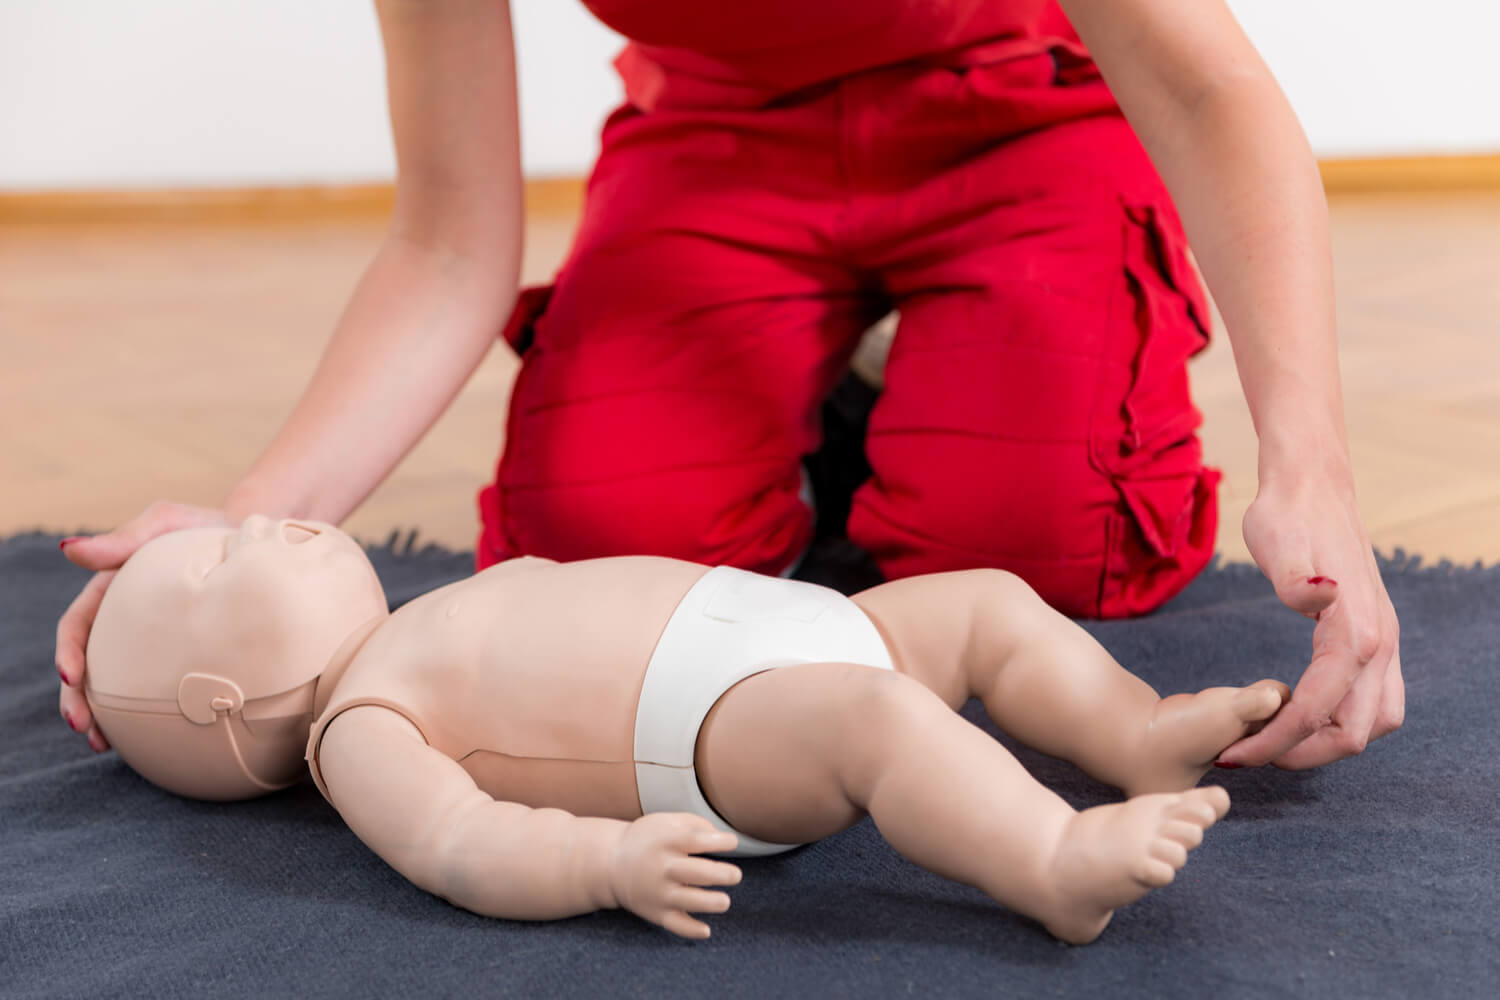 Step 1 of CPR in Babies